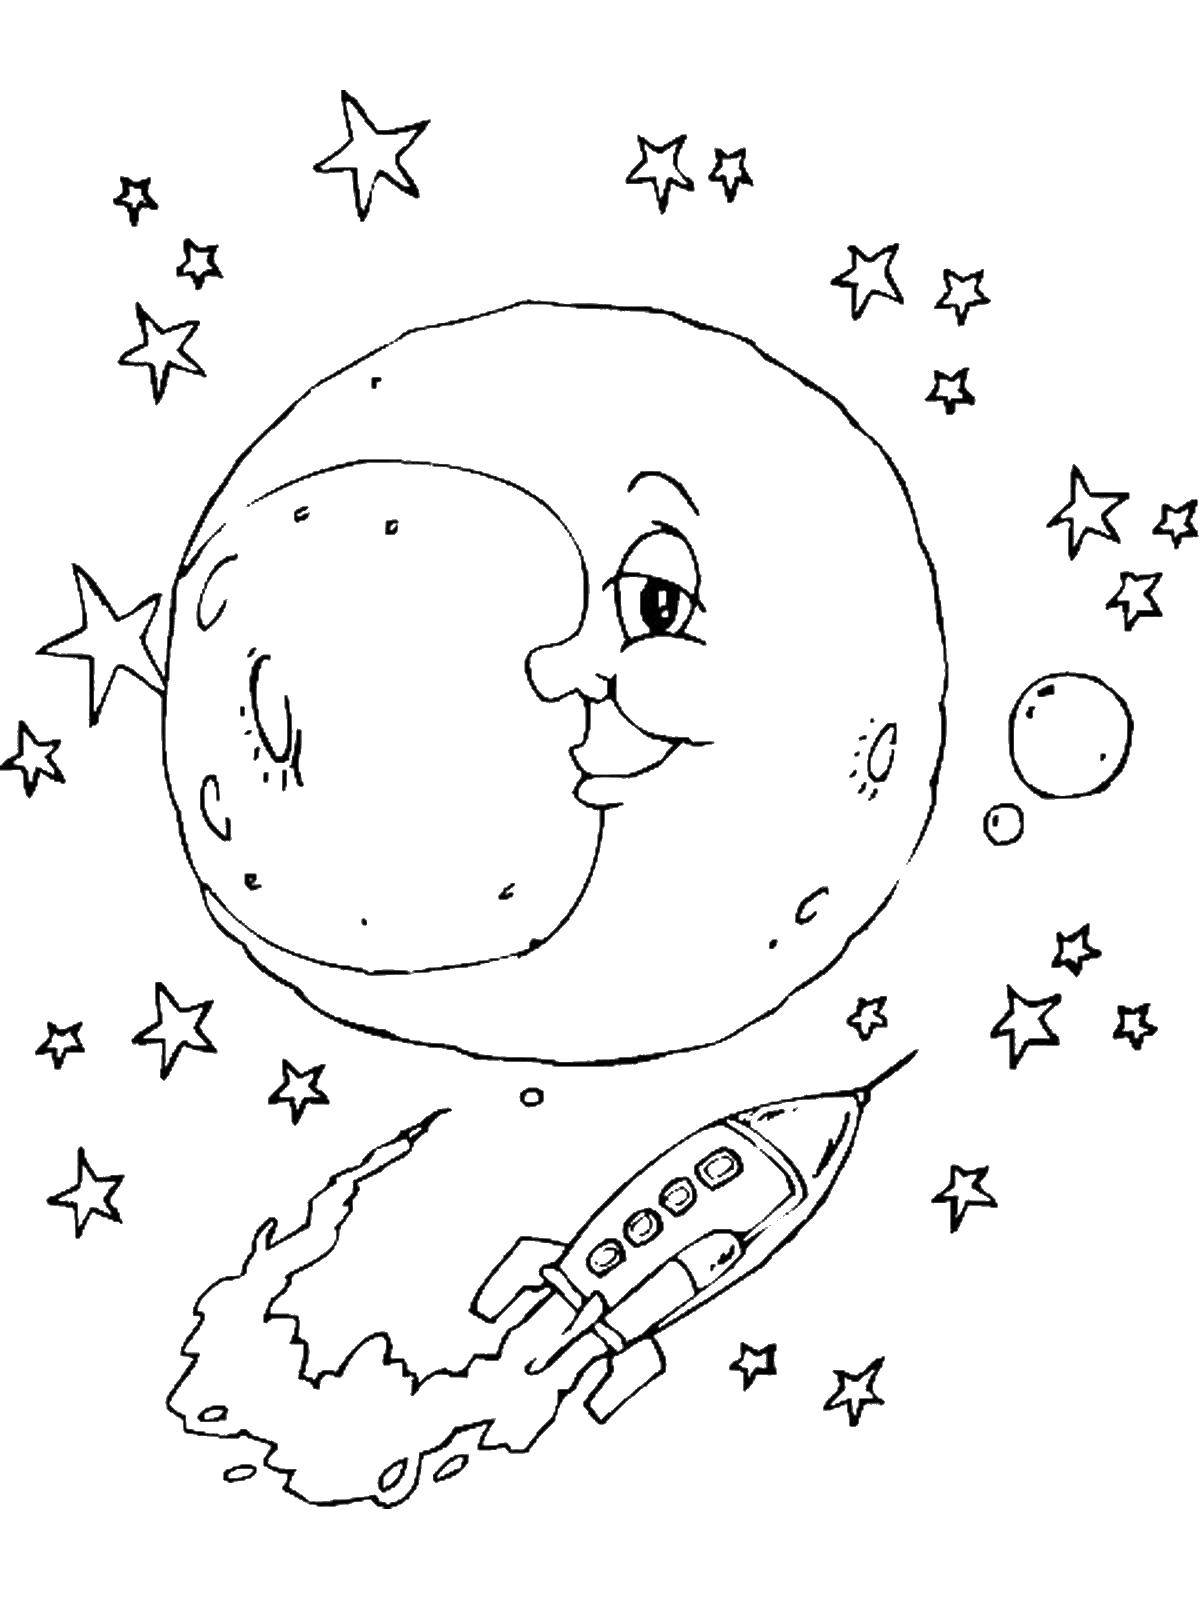 Coloring Rocket to the moon. Category space. Tags:  rocket, space.